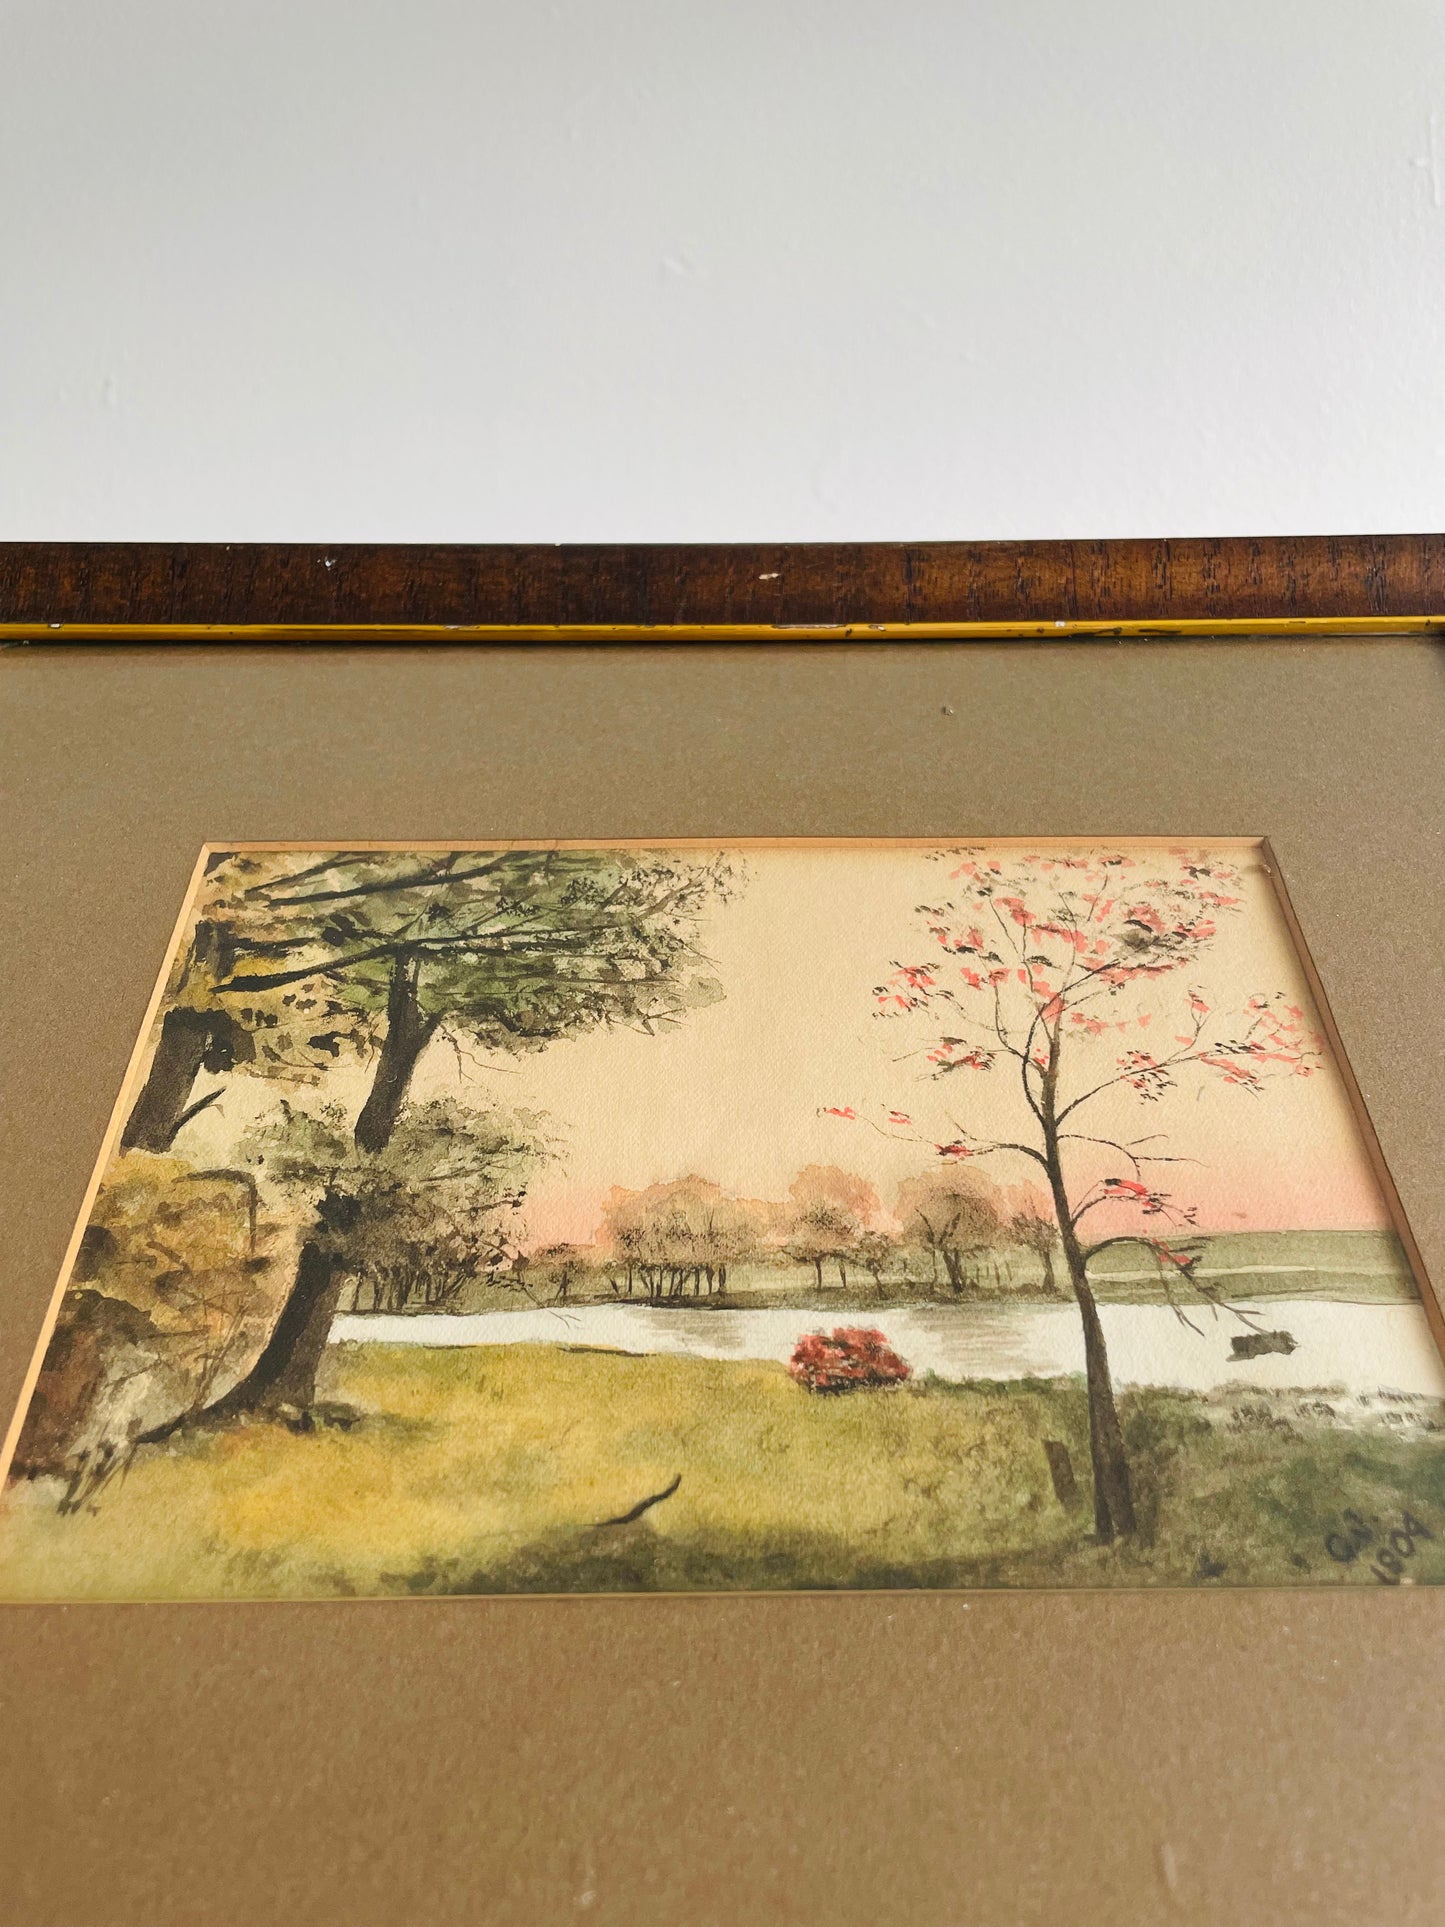 Antique Original Art Watercolour Painting of Forest Along River - Signed & Painted in 1904 - 119 Years Old!